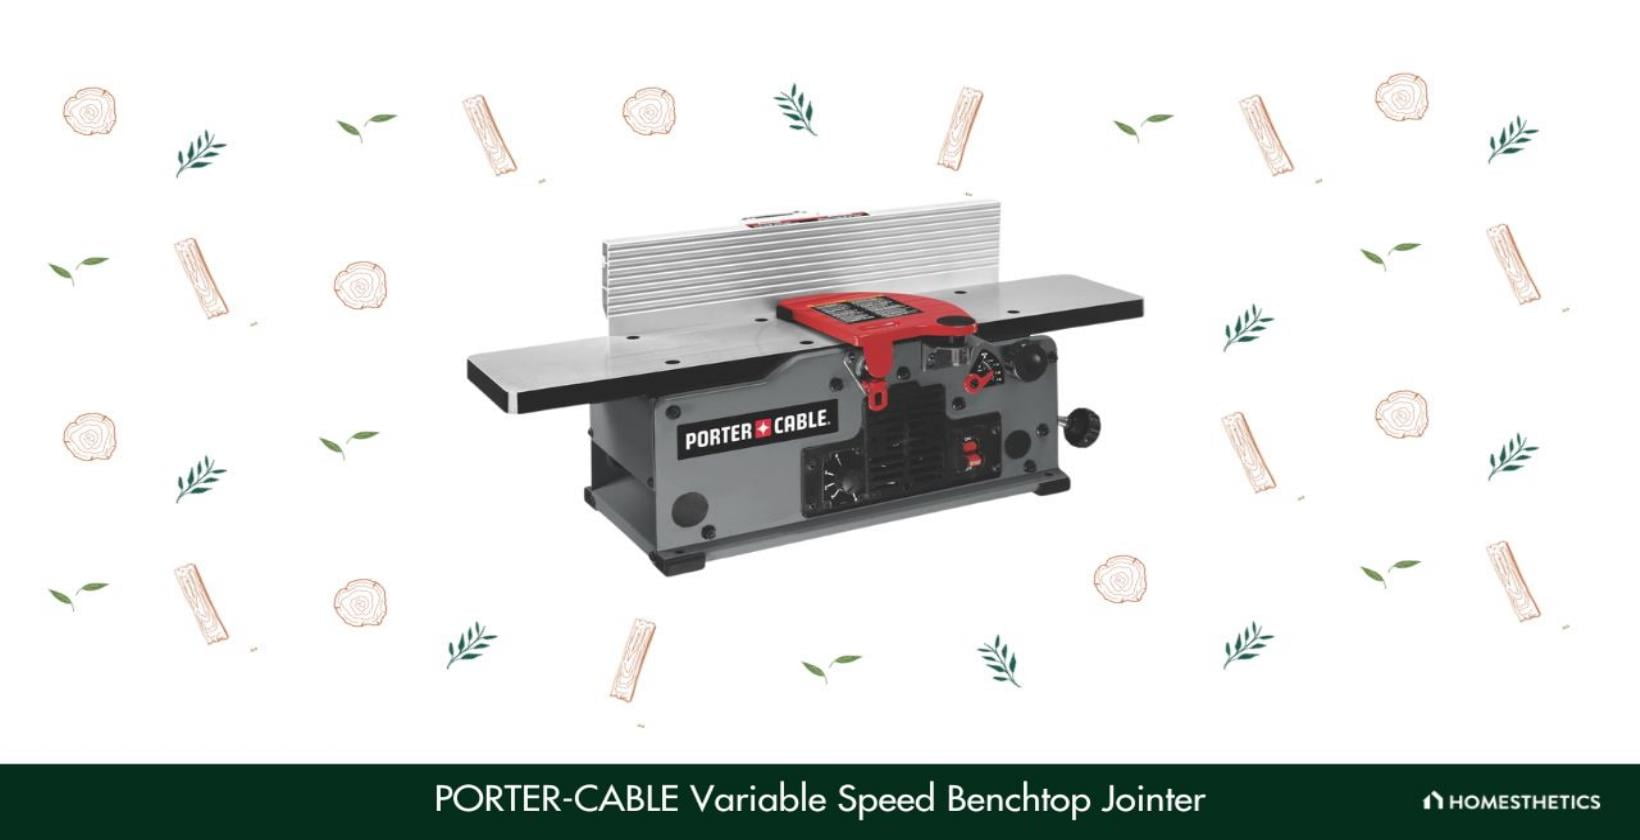 2. PORTER CABLE Variable Speed Benchtop Jointer